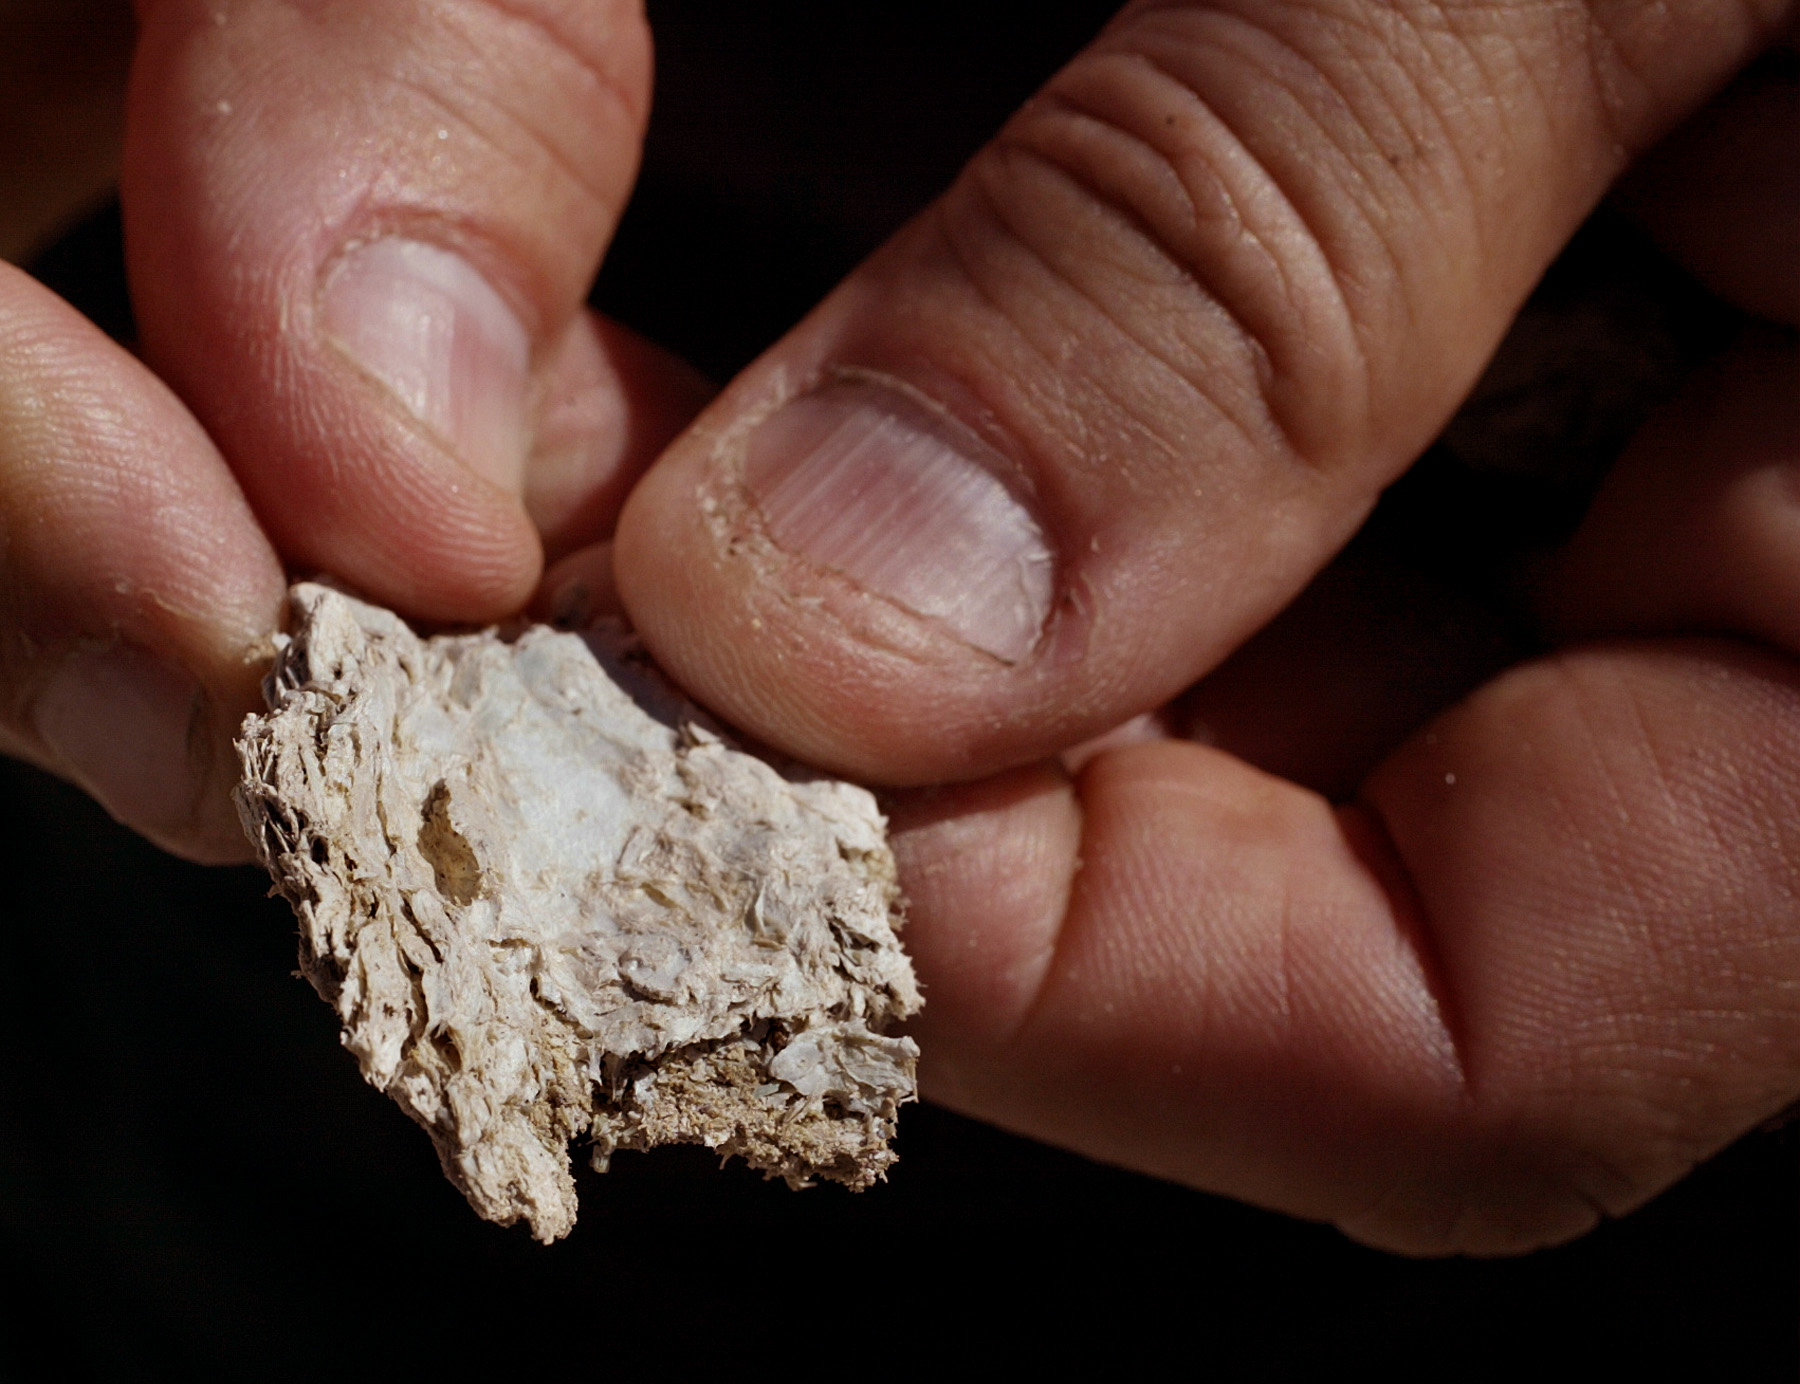 Tim Moore, of the U.S. Bureau of Land Management, holds a piece of raw asbestos found on the floor of an idle mine in the mountains above the King City, in 2003.  (Photo by Carlos Chavez/Los Angeles Times via Getty Images) (Carlos Chavez&mdash;Los Angeles Times/Getty Images)